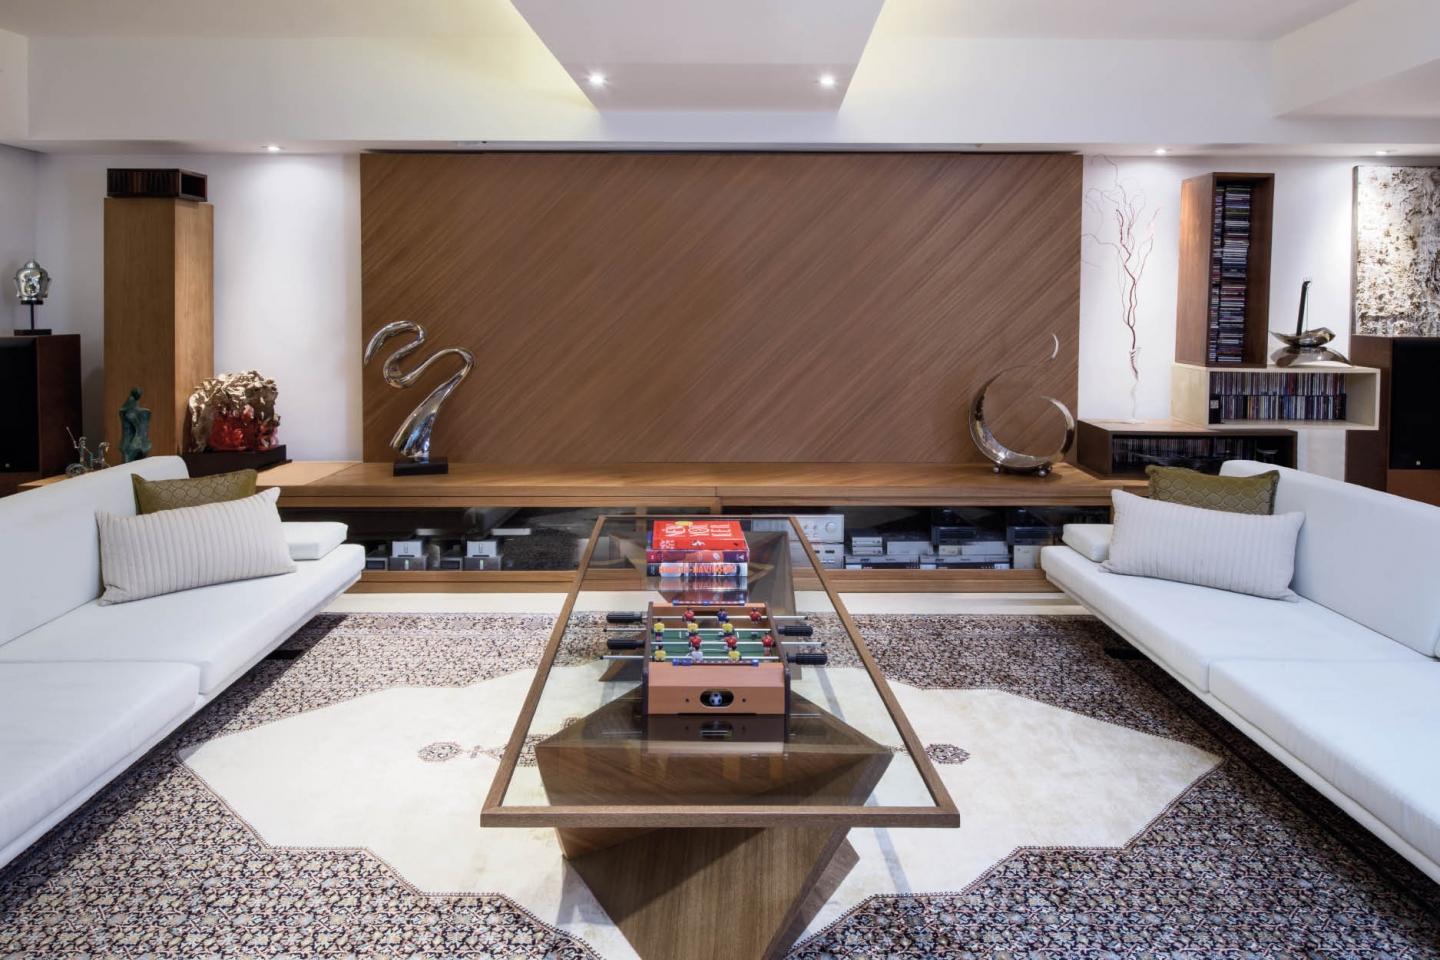 Clean lines, white walls, wood panels and structured sofas create the impression of a contemporary conversation pit